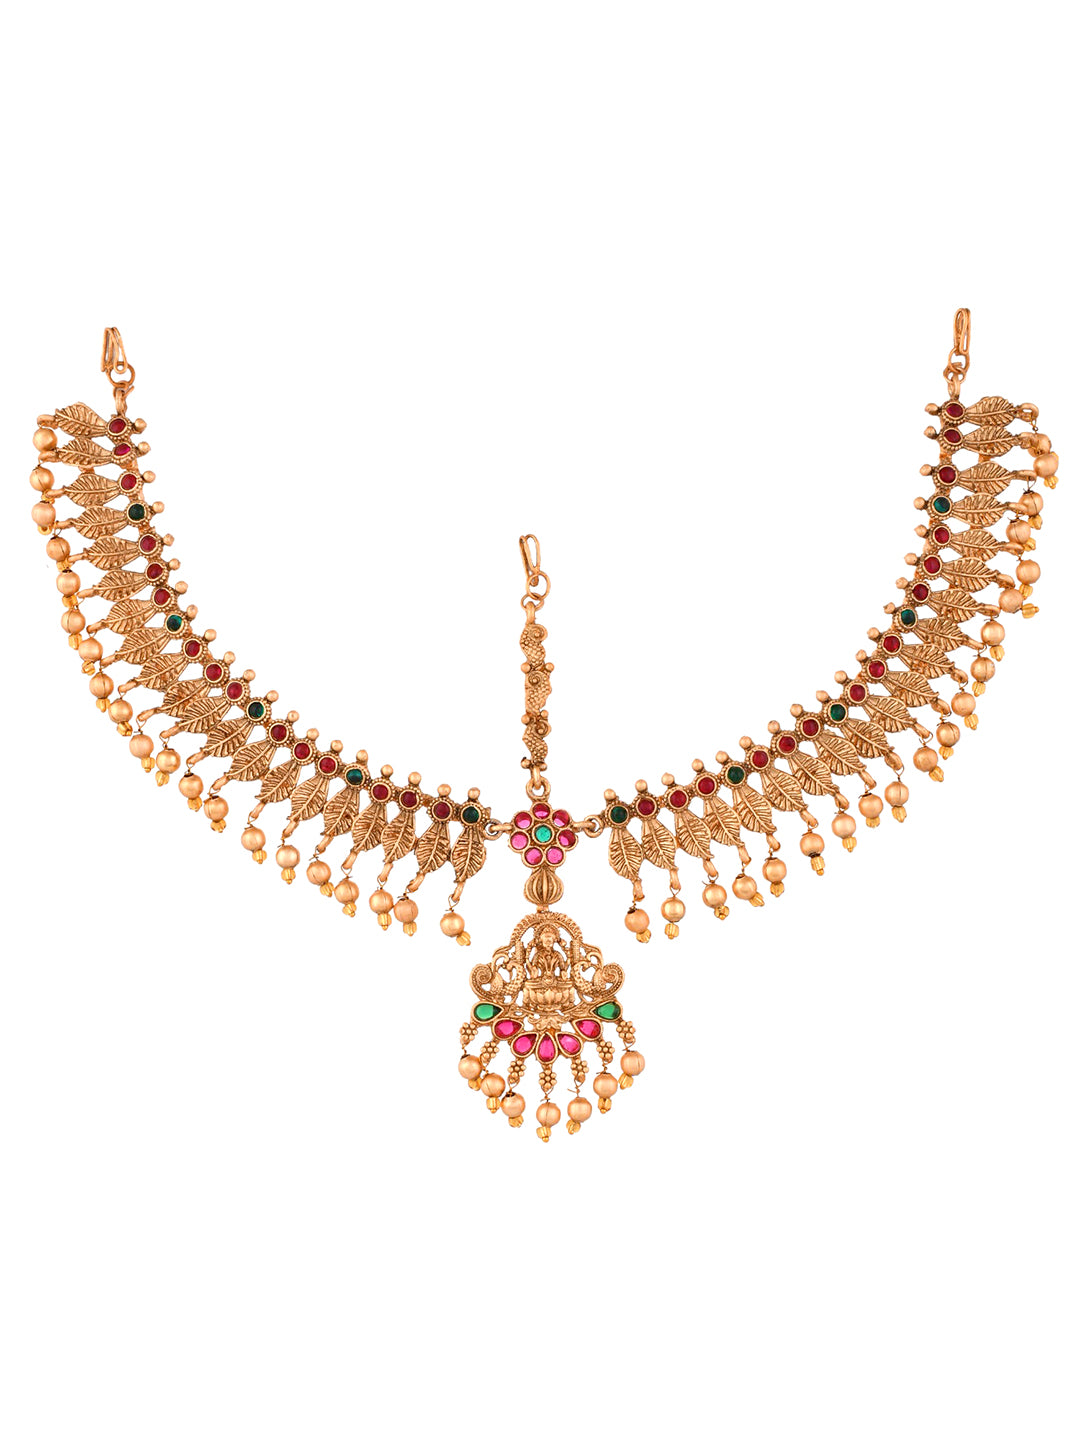 South Indian Temple head jewellery